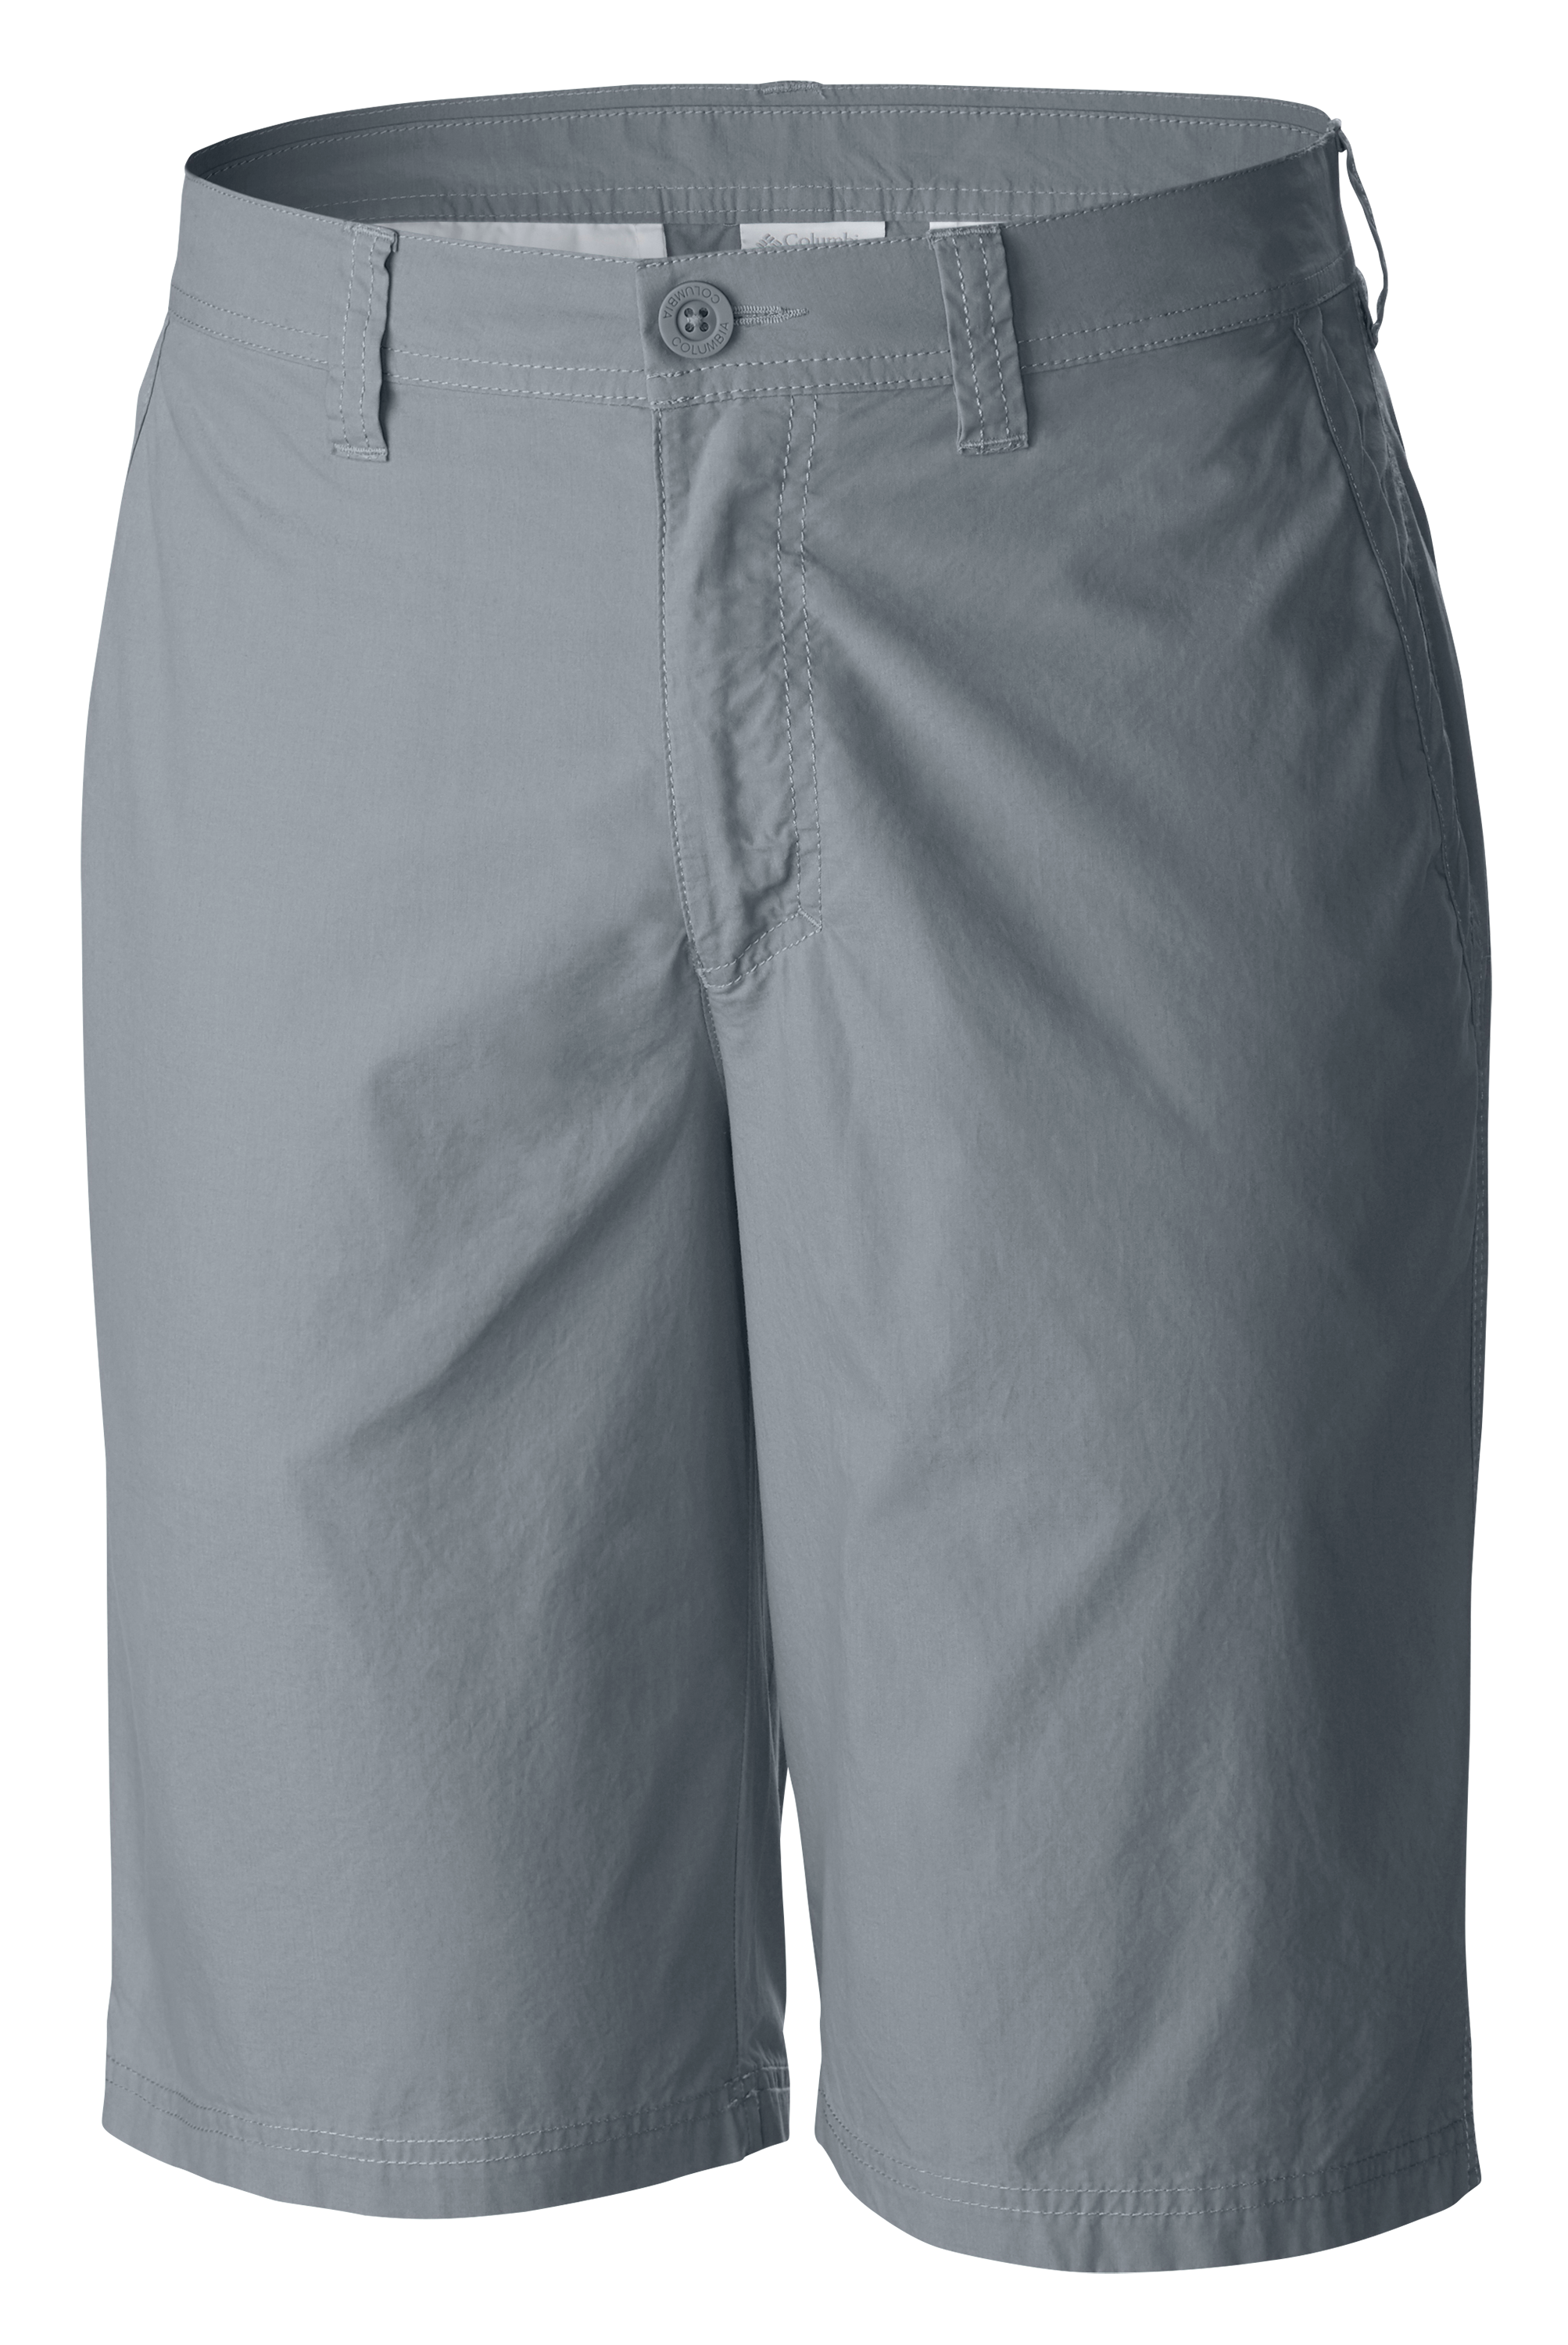 Columbia Washed Out Shorts for Men